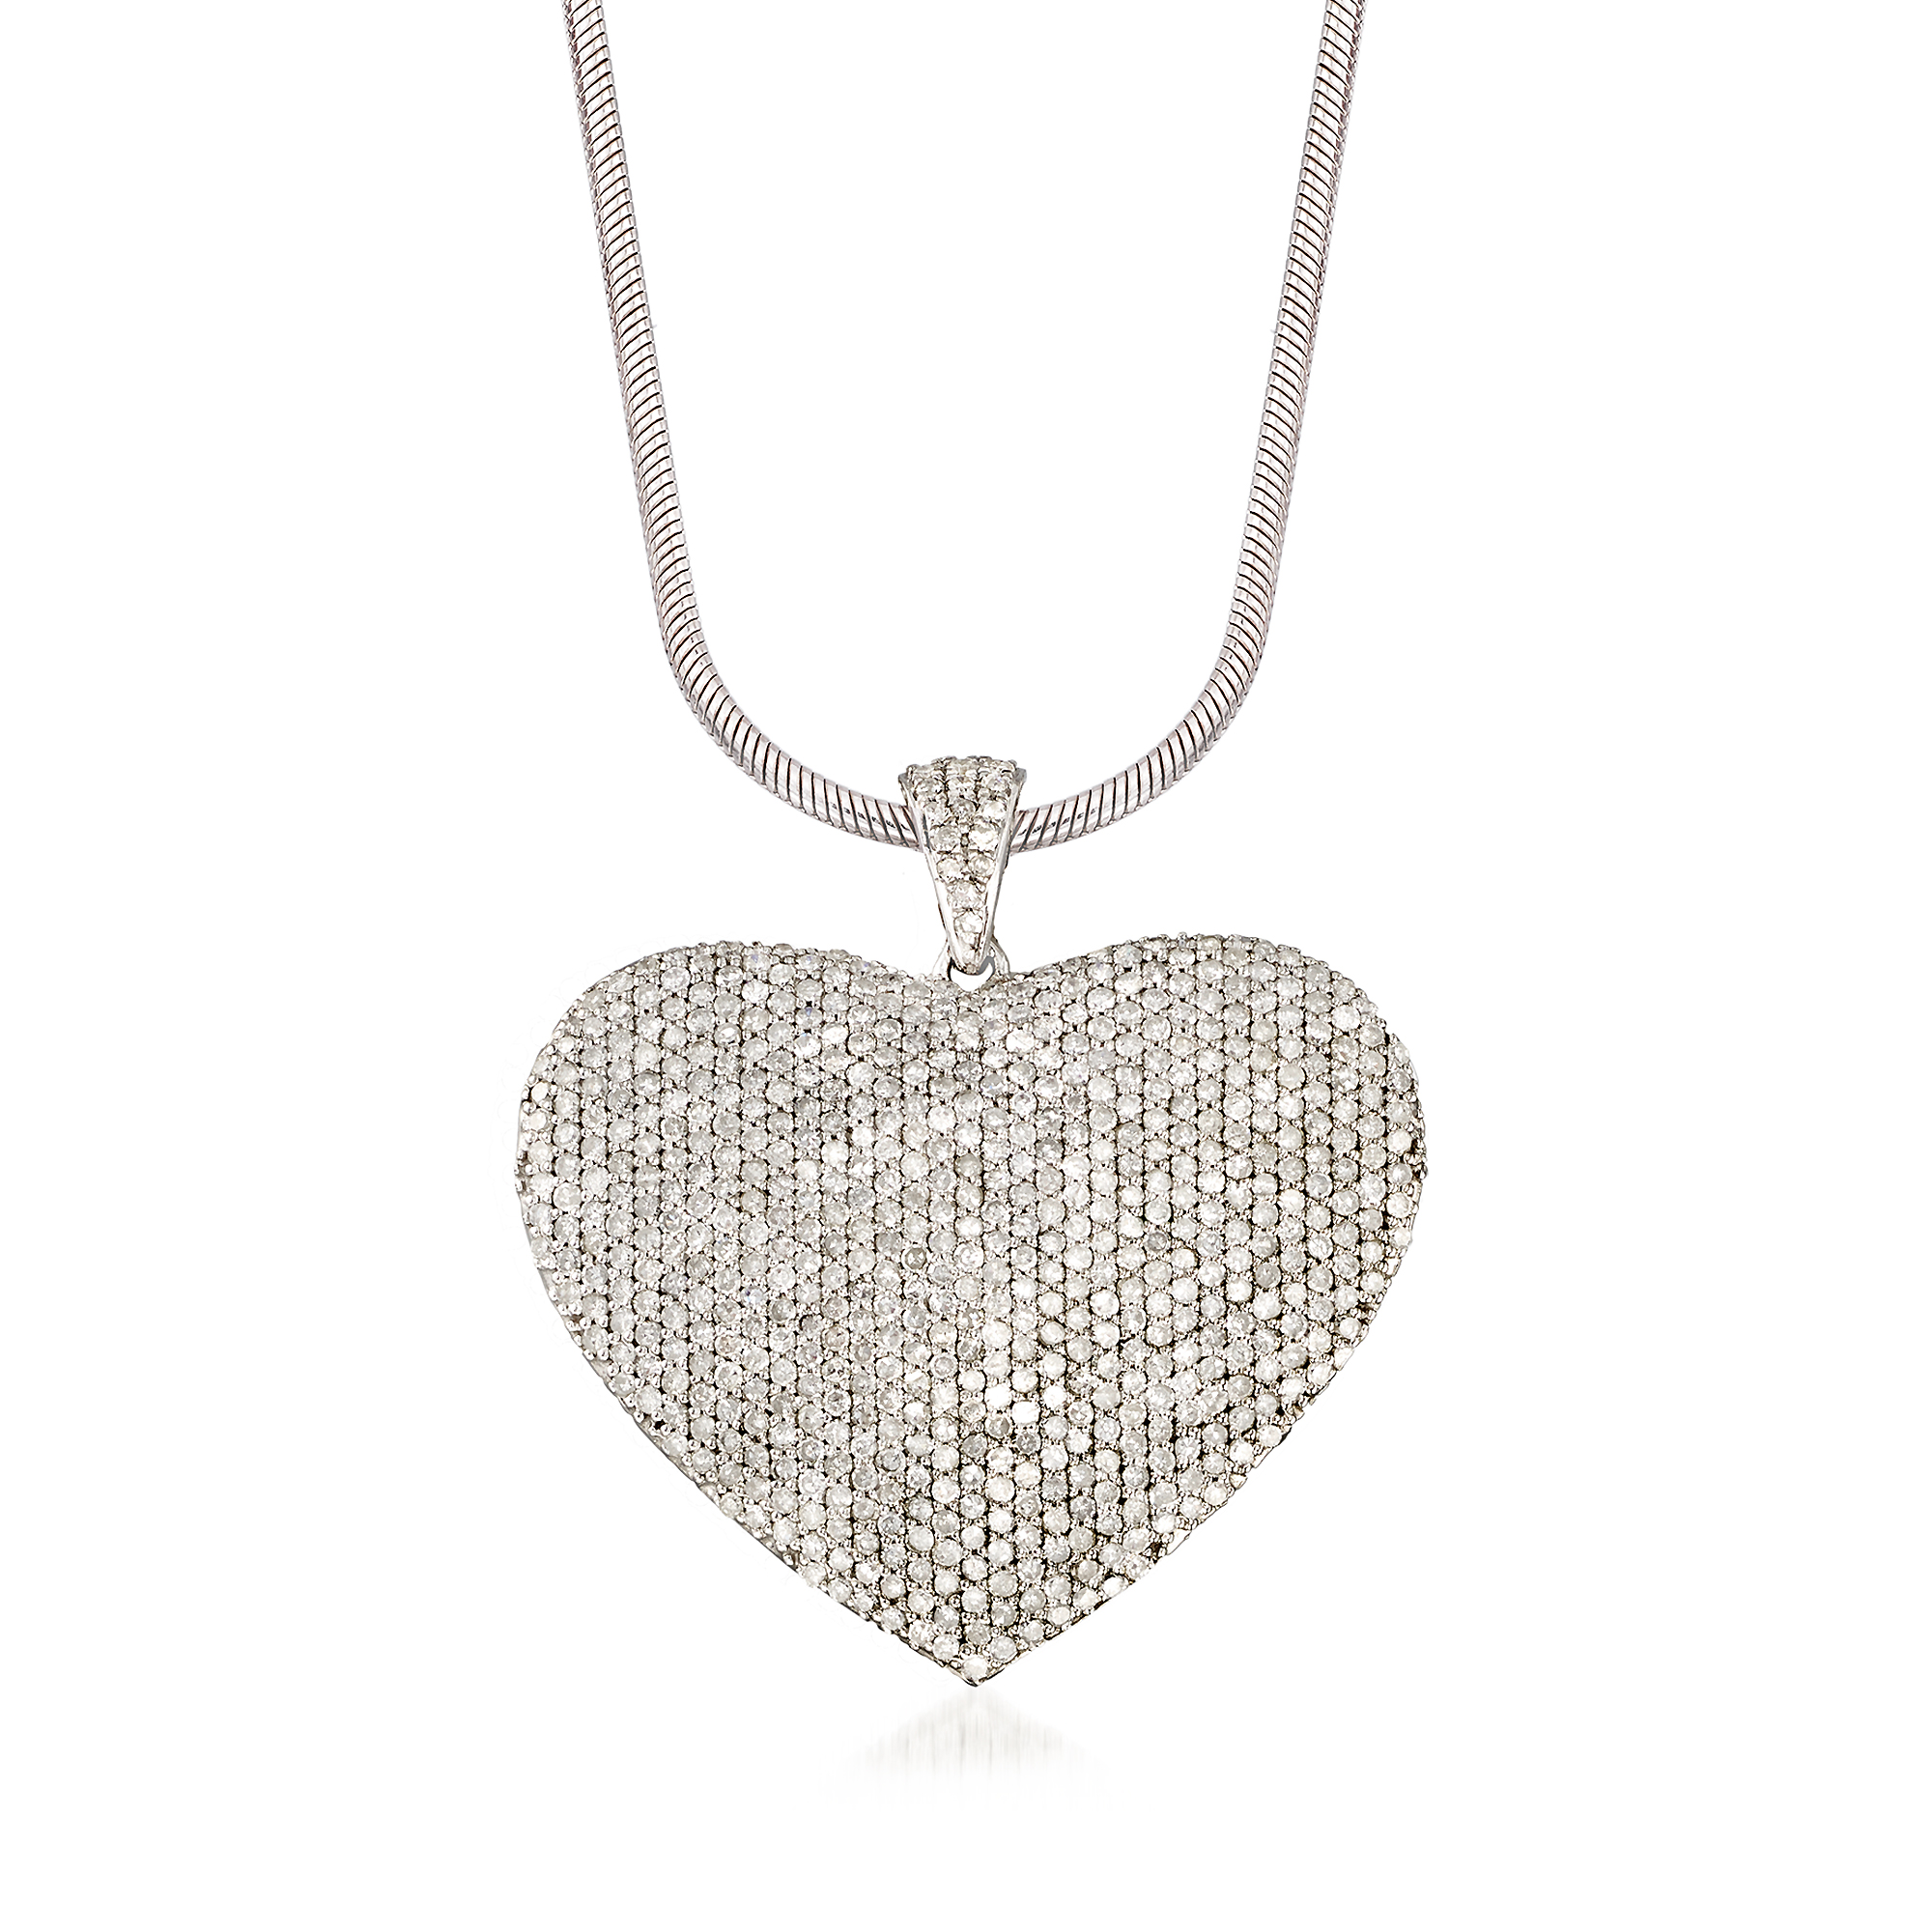 Pave Heart Necklace Crystal Heart Elongated Heart Necklace Pendant Necklace Sterling Silver Pave Heart CZ Heart Anniversary Gift